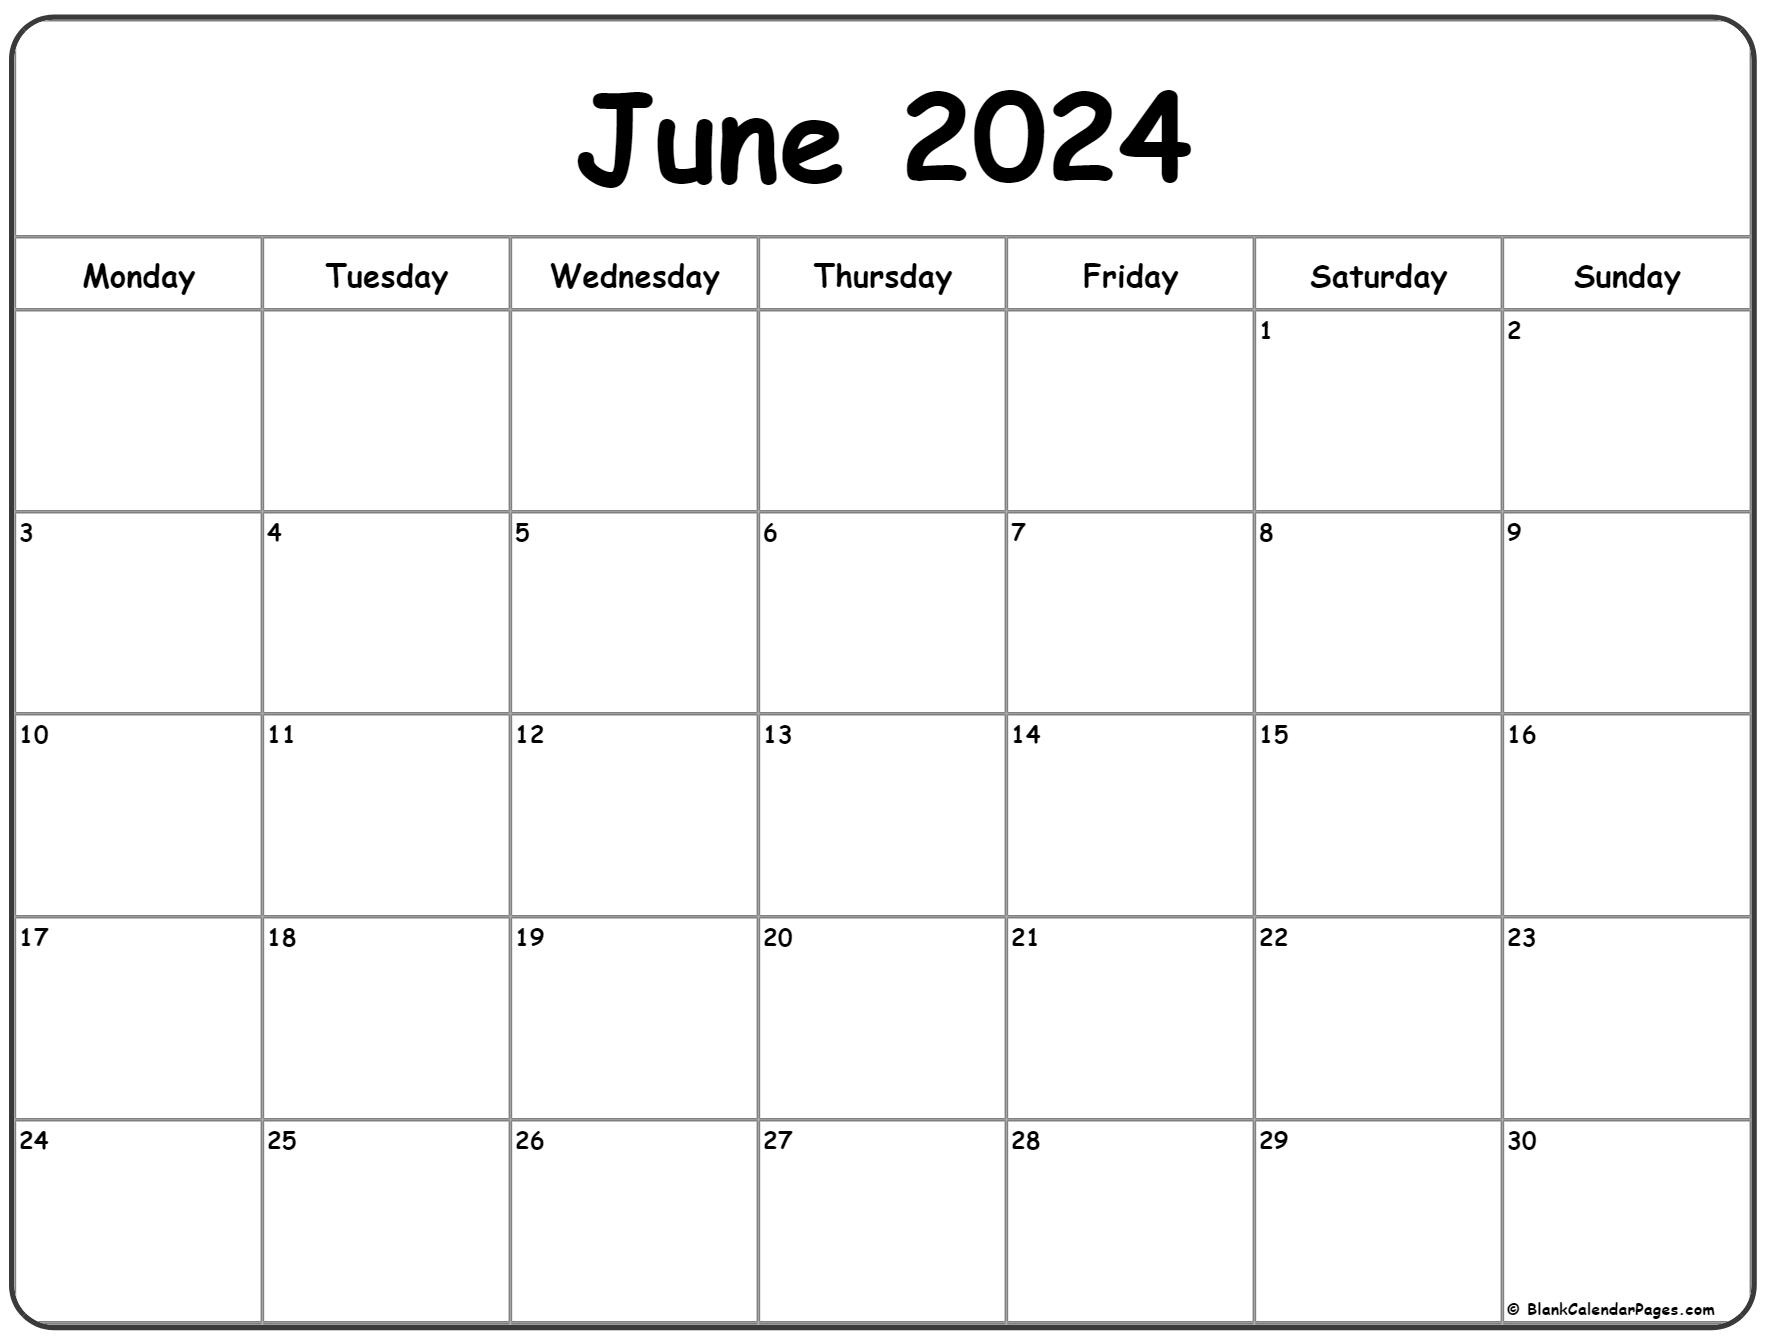 June 2024 Monday Calendar | Monday To Sunday intended for Give Me The Calendar For June 2024